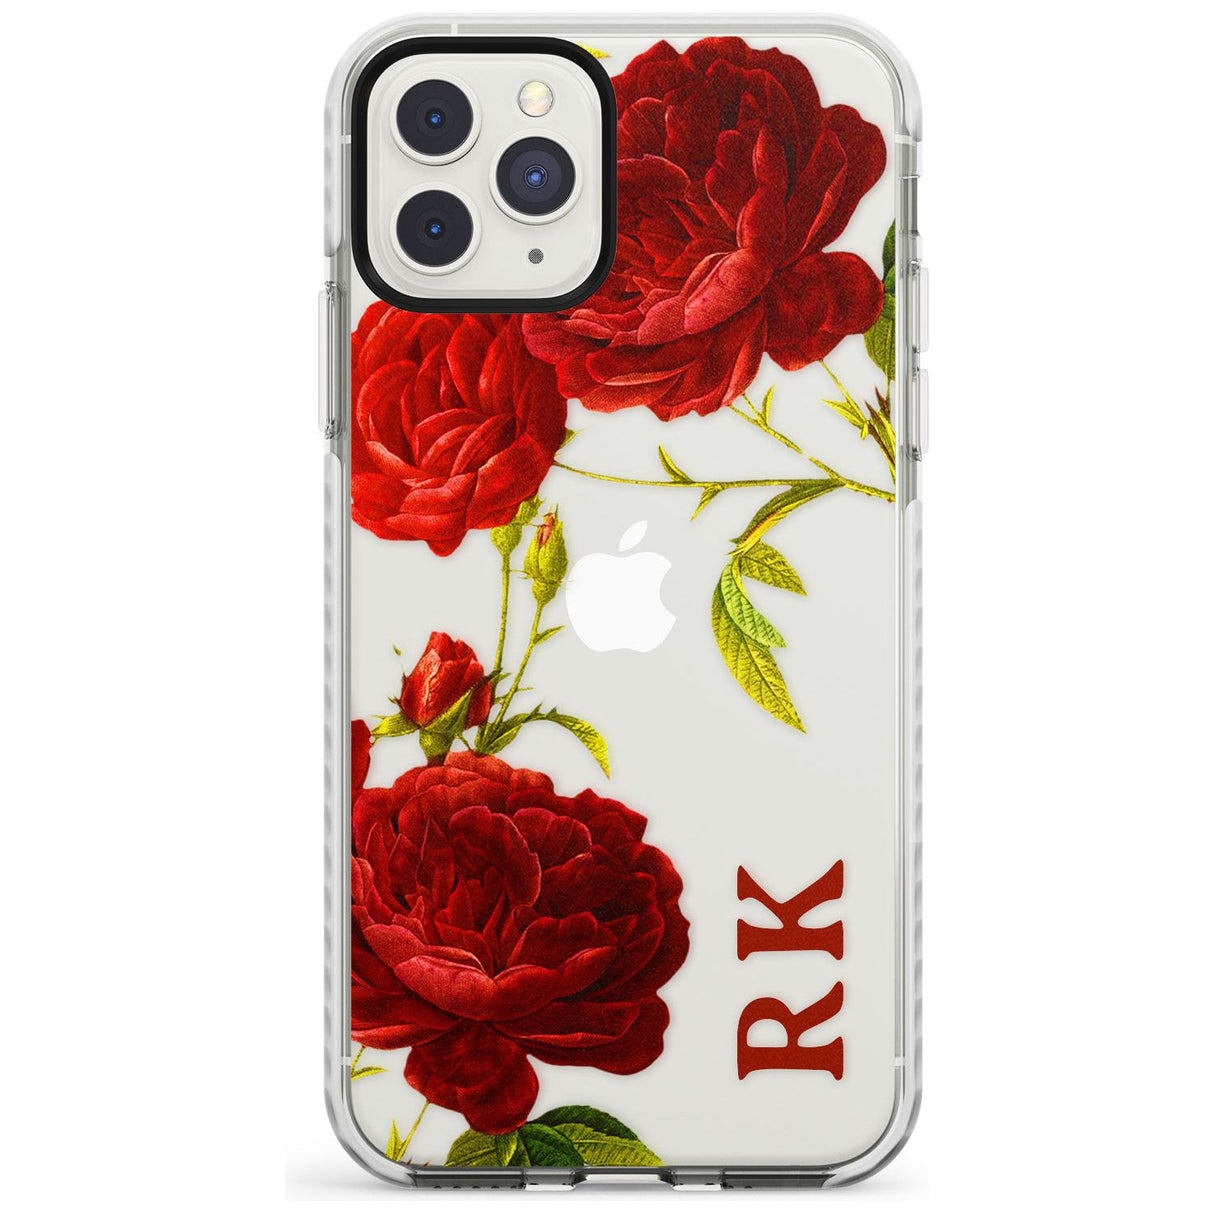 Custom Clear Vintage Floral Red Roses Impact Phone Case for iPhone 11 Pro Max